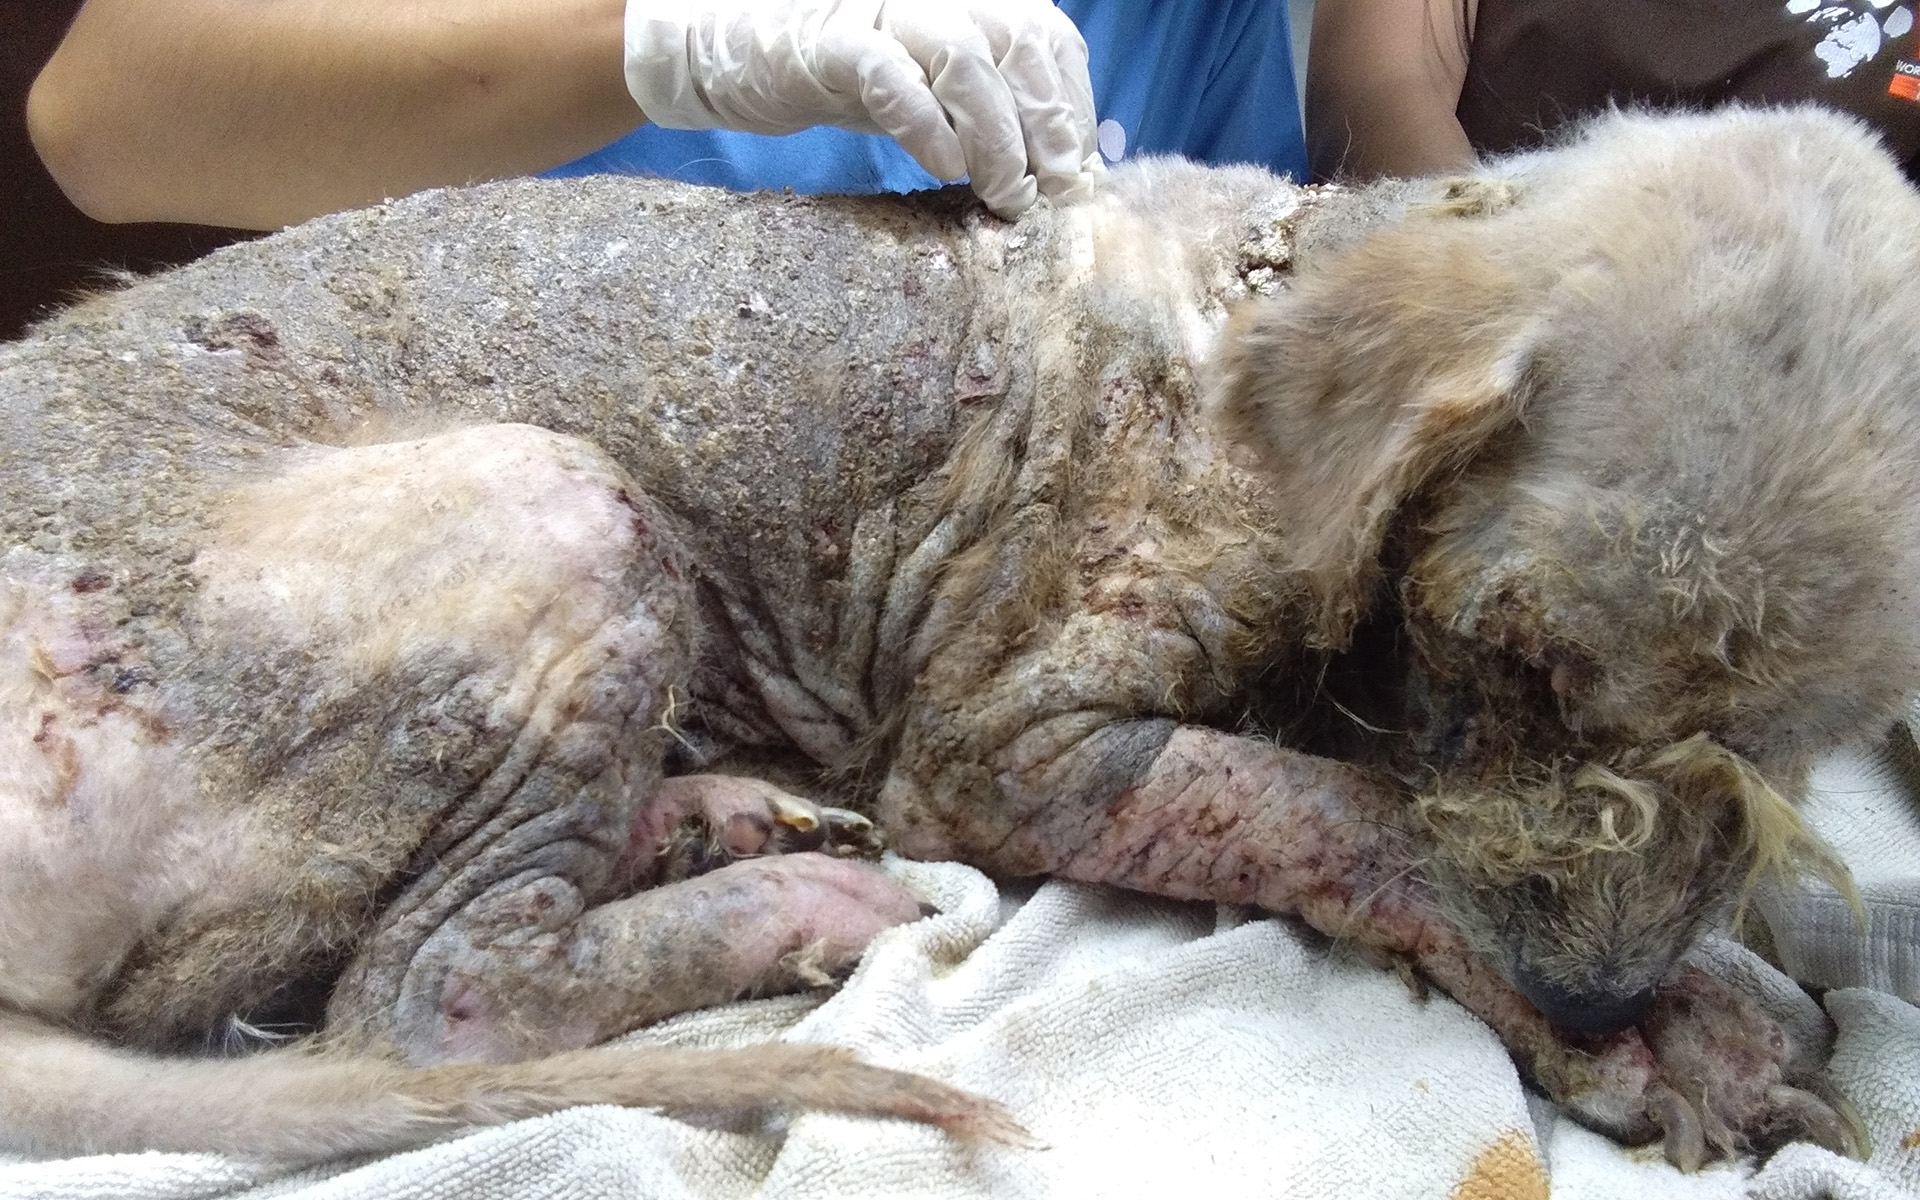 Painful Skin Infection Leaves Thai Street Dog Fighting for His Life